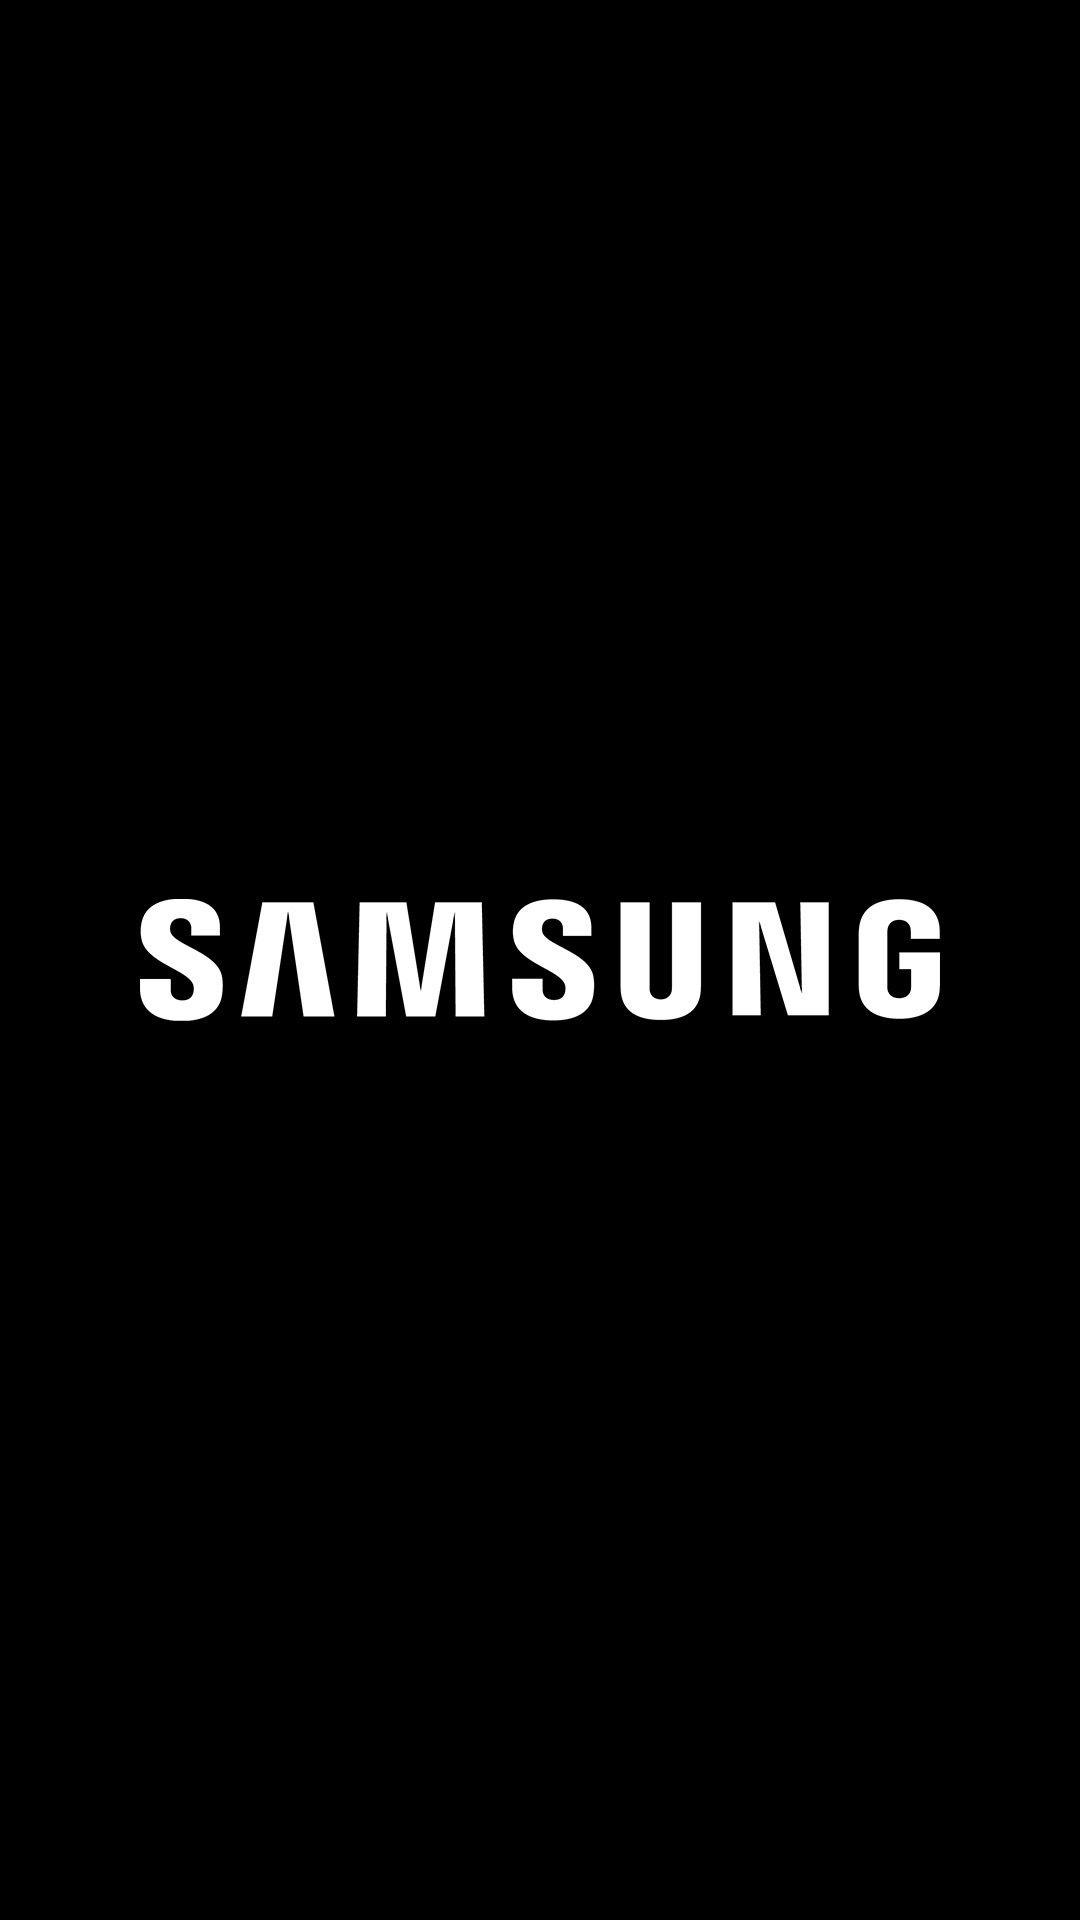 Samsung: Black and white, One of the biggest technology companies on Earth. 1080x1920 Full HD Wallpaper.